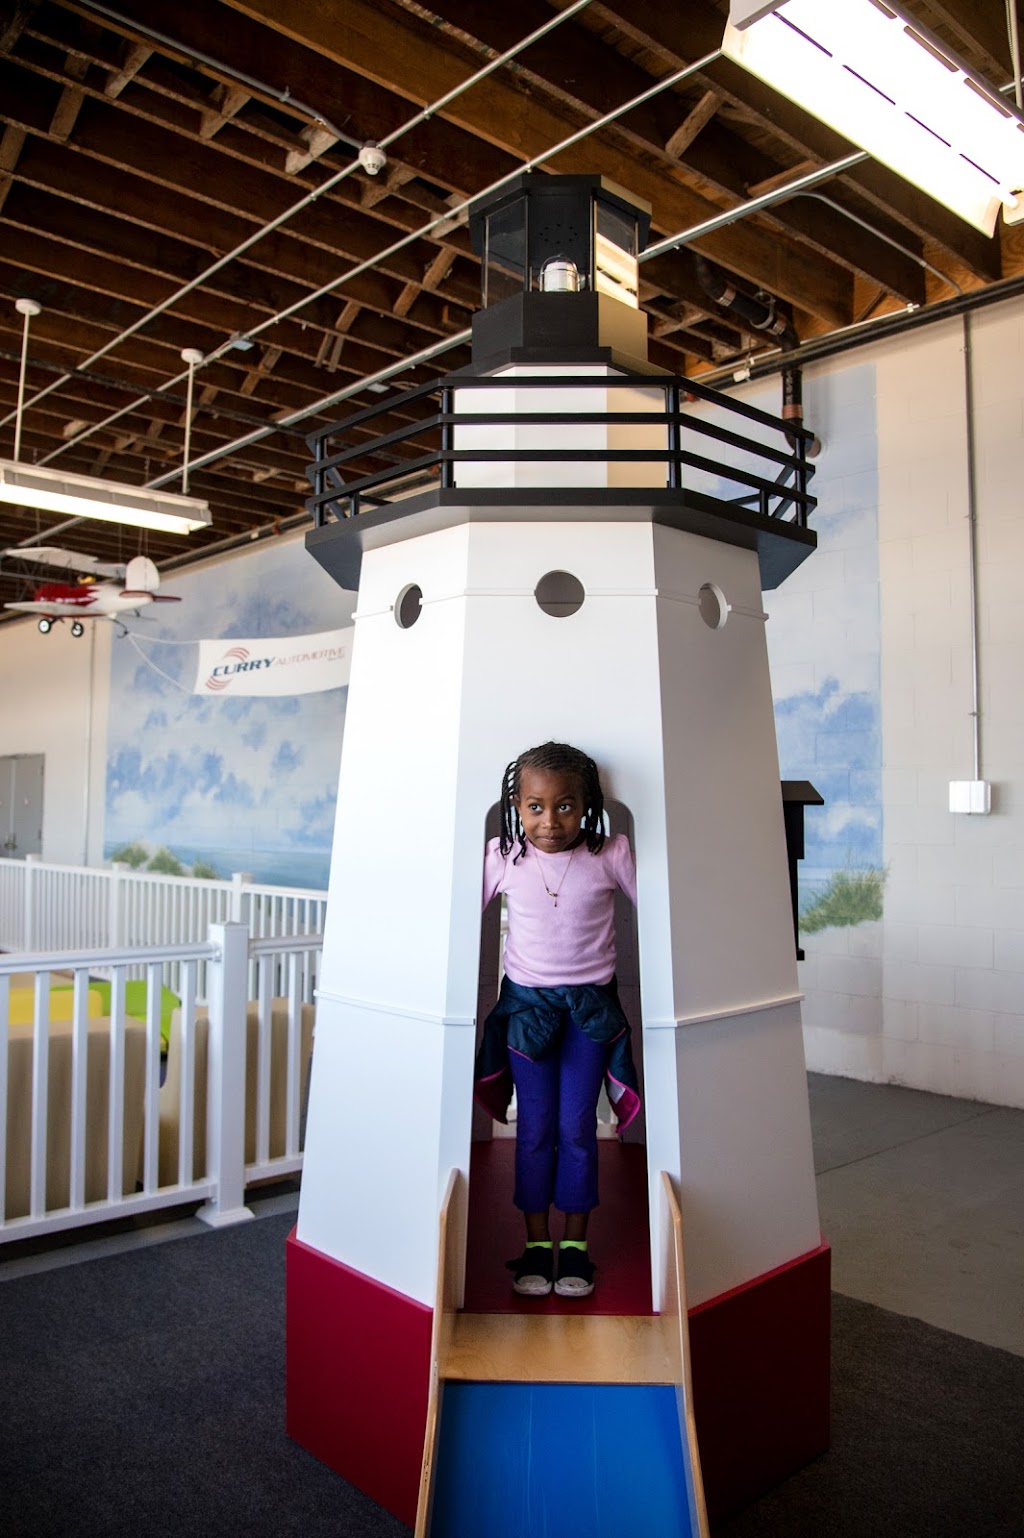 Westchester Childrens Museum | 100 Playland Pkwy, Rye, NY 10580 | Phone: (914) 421-5050